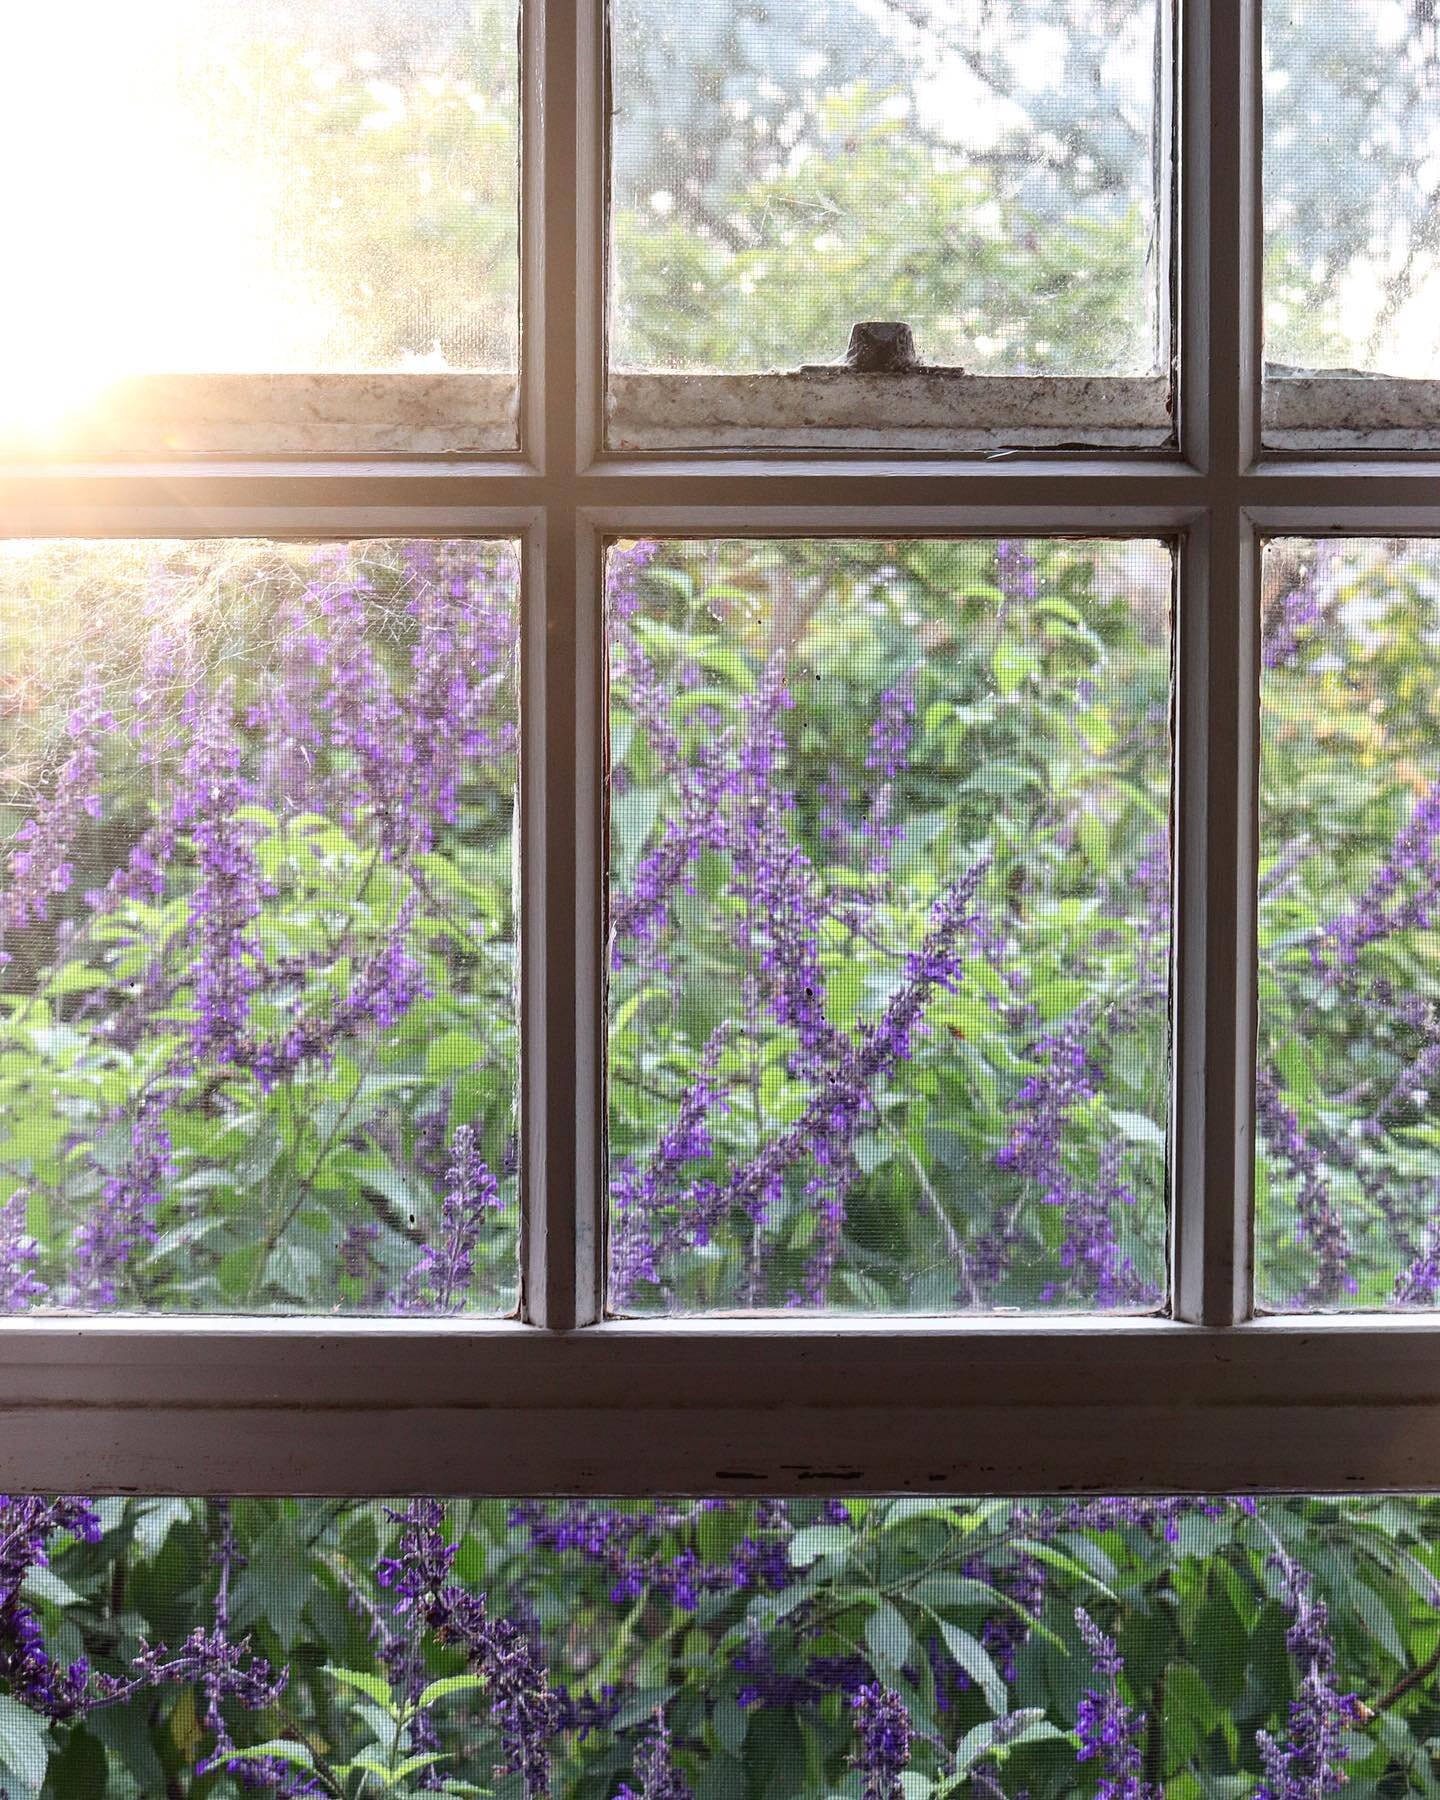 Autumn is crisp air, soft sunlight and mountains of salvia. Wake up to this view when you sleep in the bedroom off the dining room, with the little old door. Autumn is here is just magic.